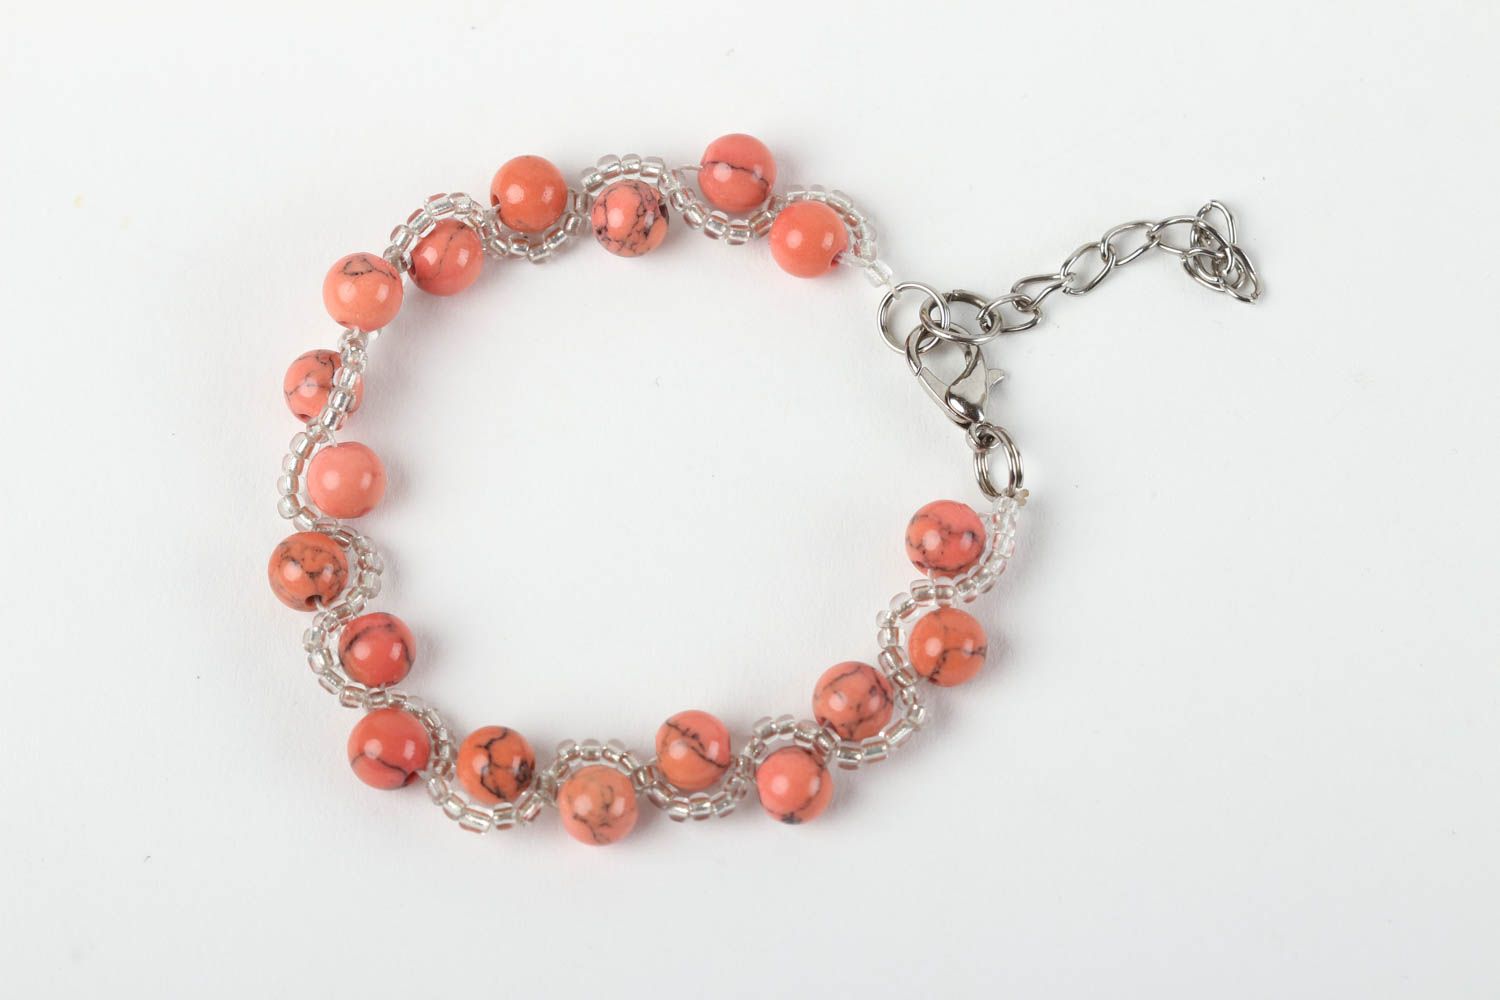 Chain line handmade beaded pale red wrist bracelet with natural stones for women and girls photo 2